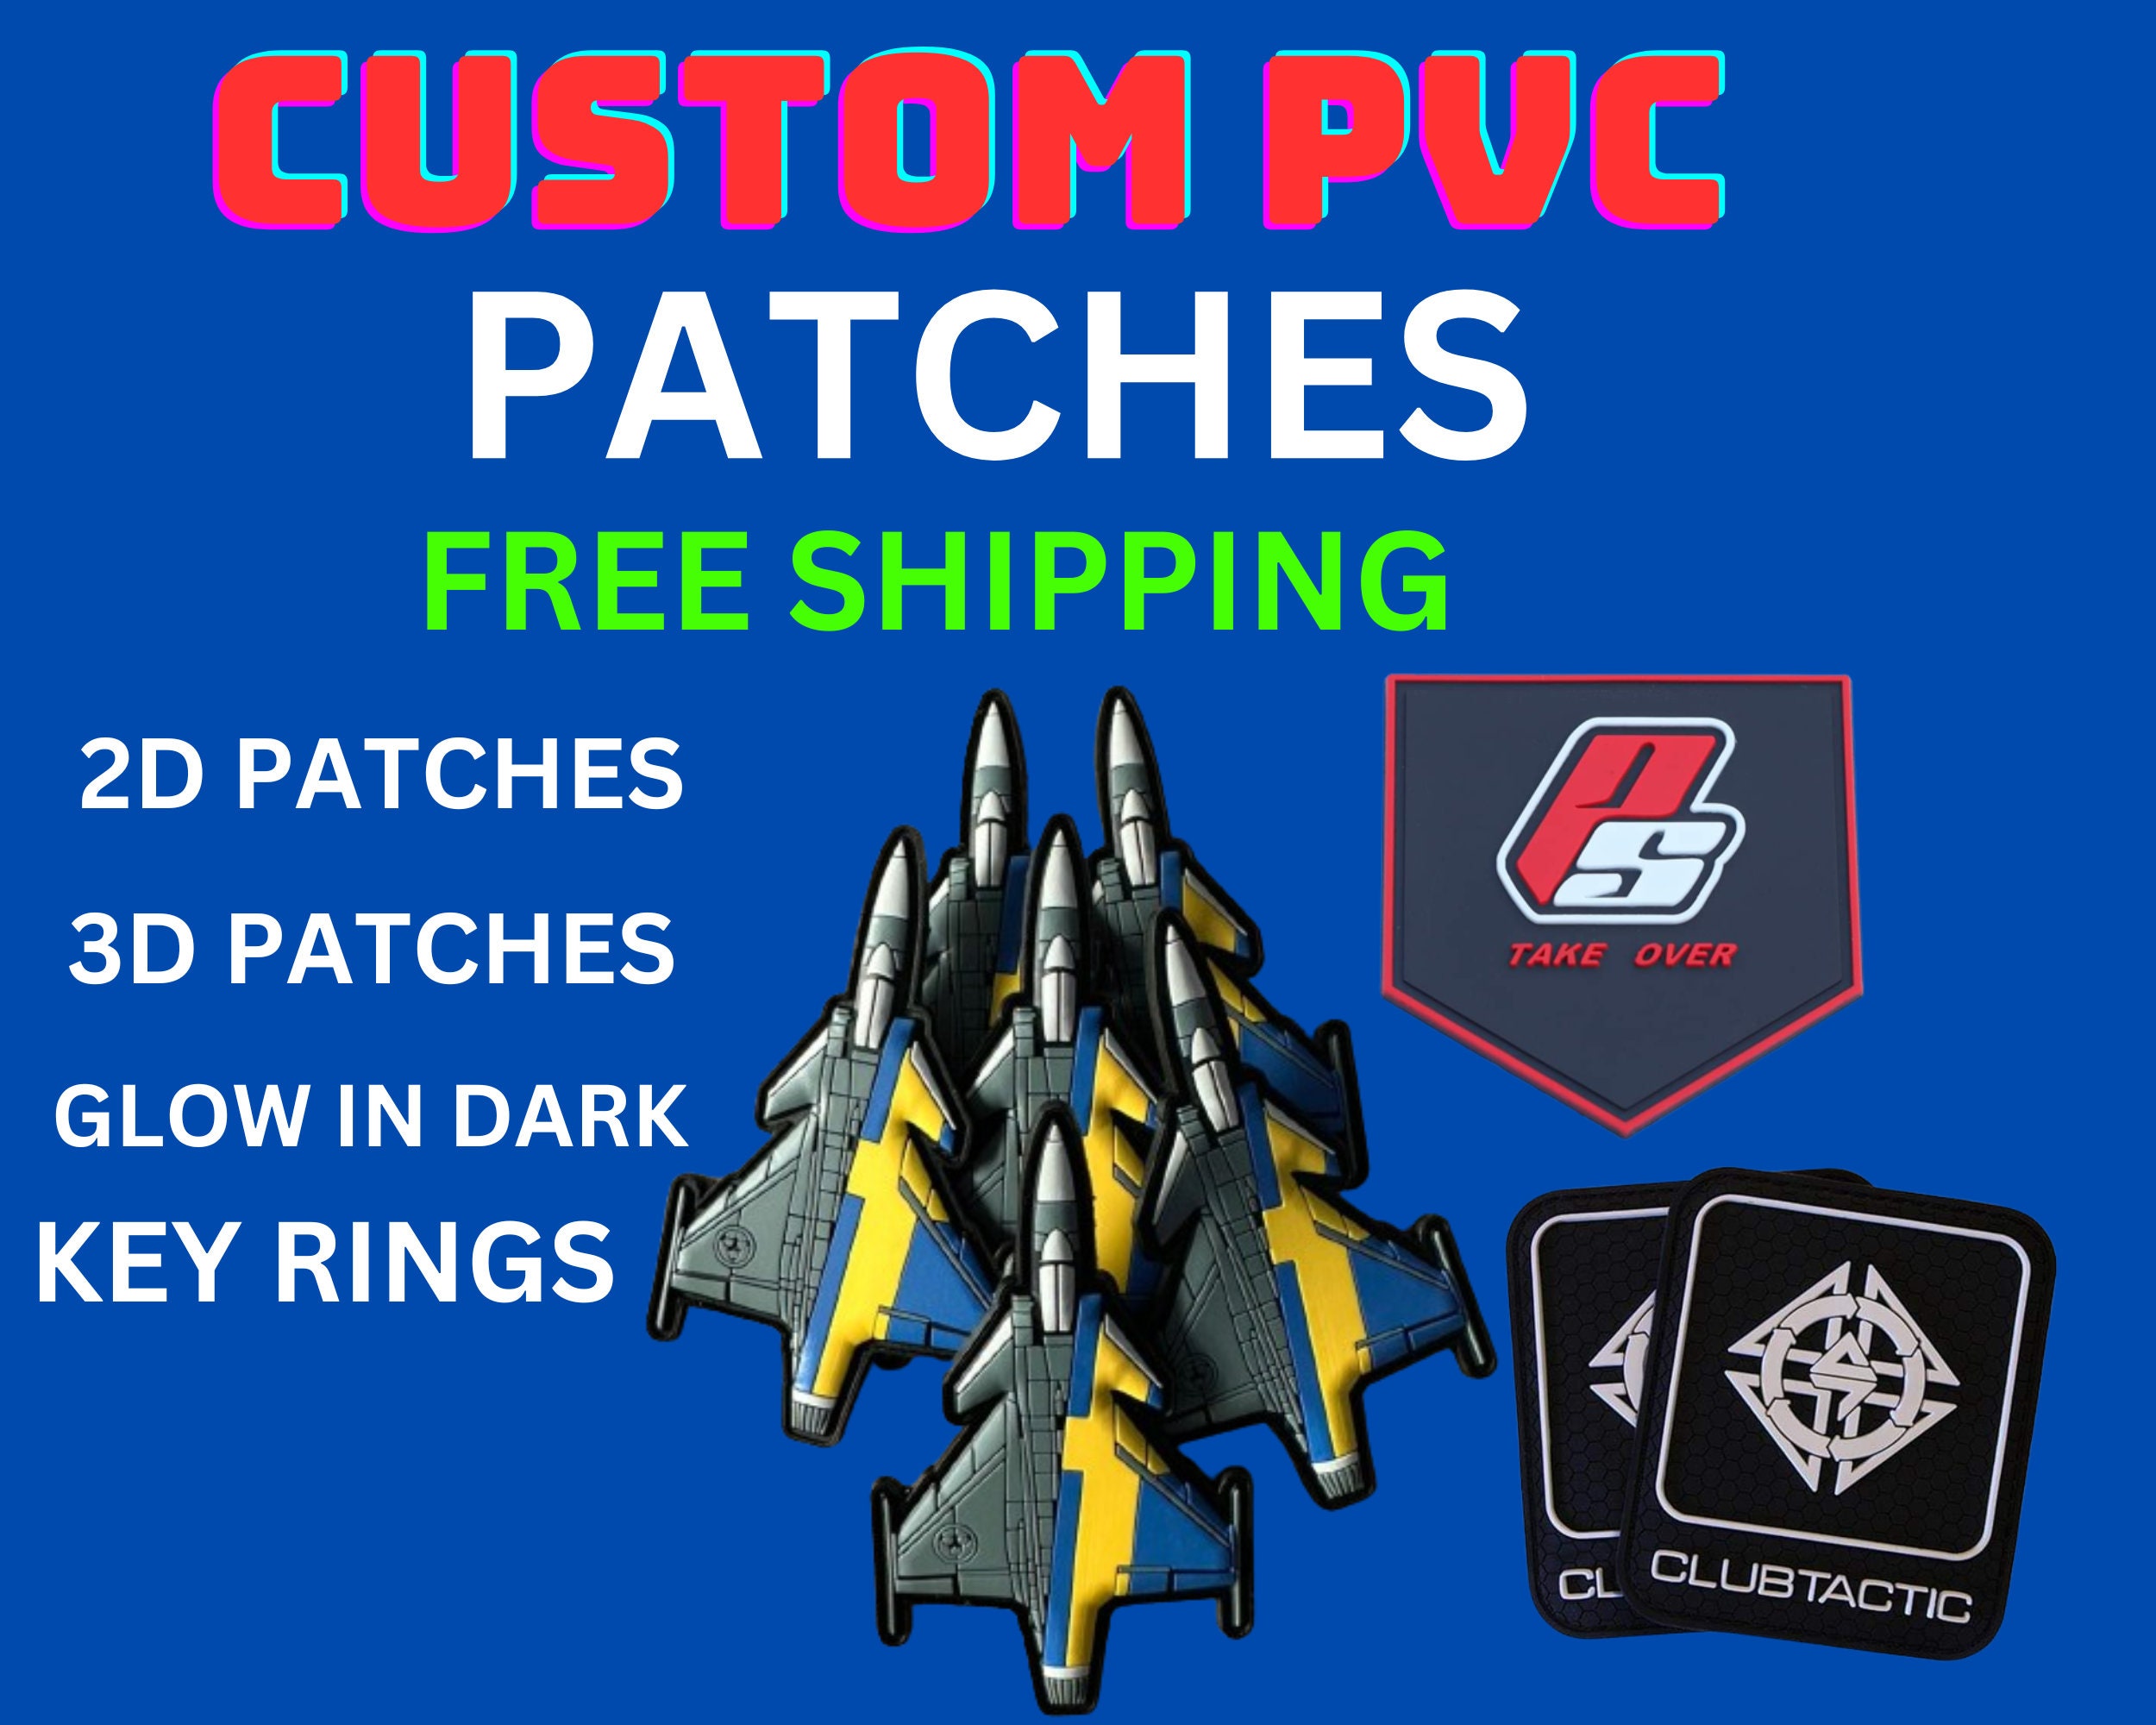 Ninja Patches - Custom Patches Delivered Faster - Free Shipping